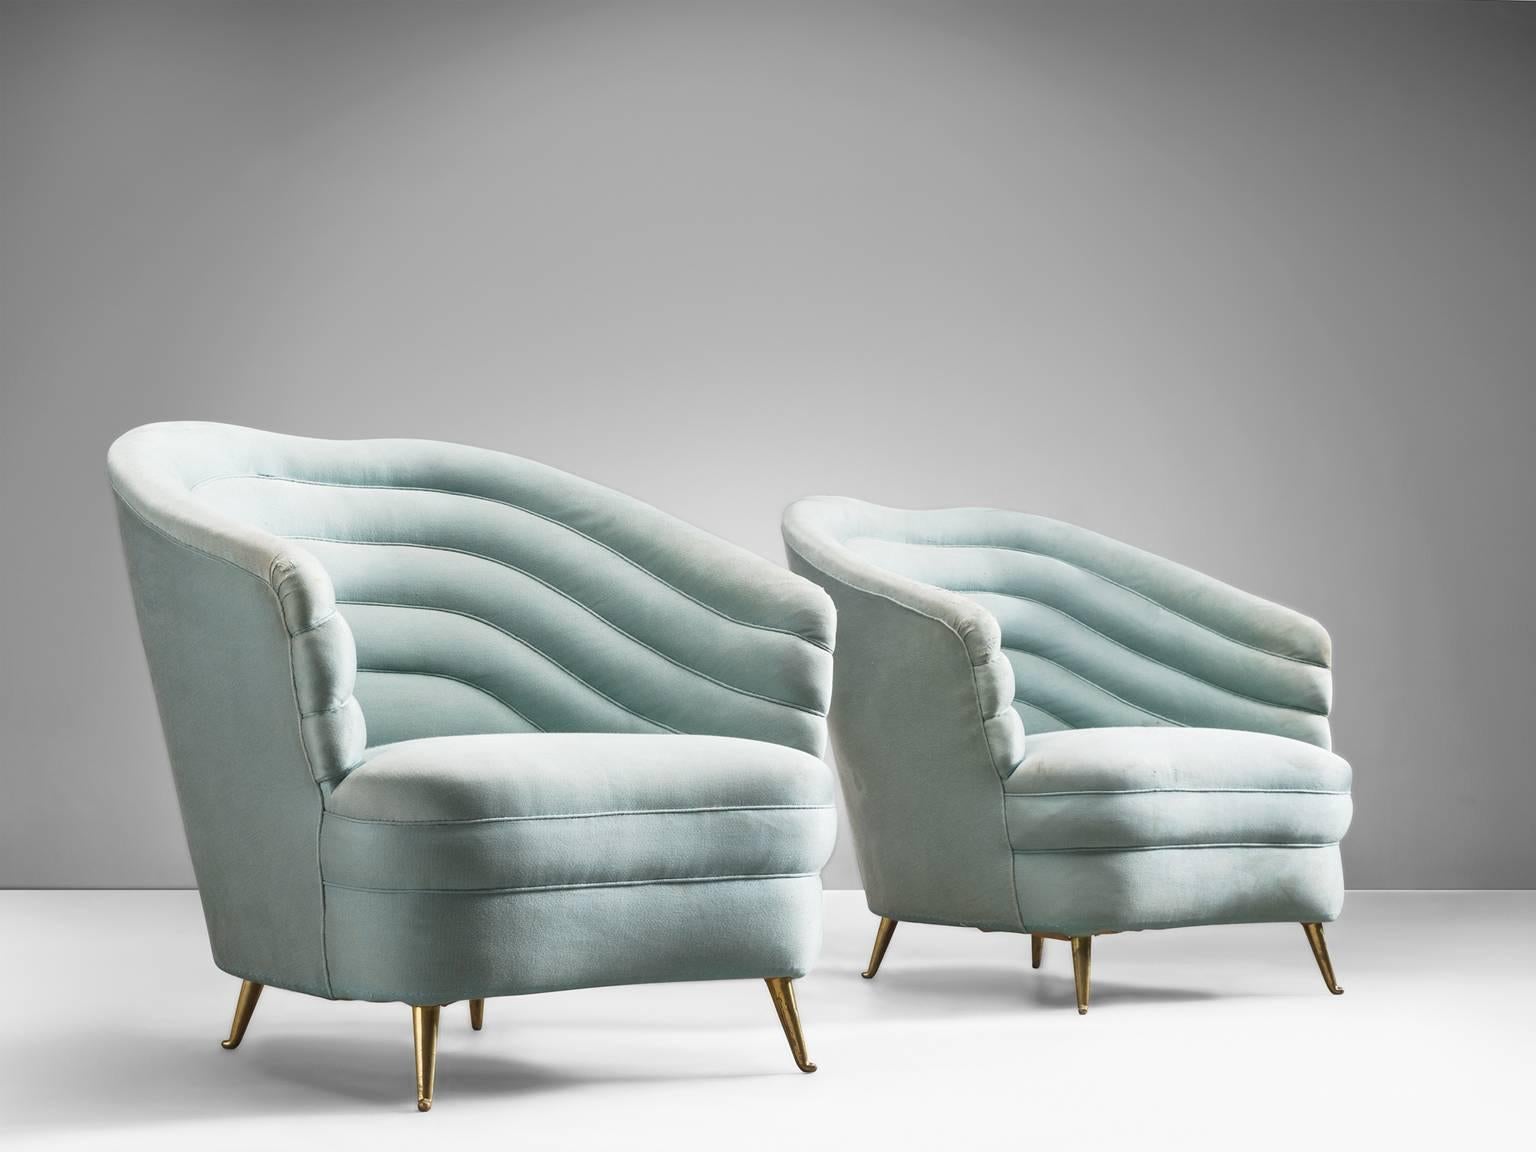 Pair of lounge chairs in velvet and metal, by Andrea Busiri Vici, Italy, 1960s.

These elegant, voluptuous pair of lounge chairs our now shown in an aquamarine, light-blue velvet. The term organic seems to be invented for these chairs as they